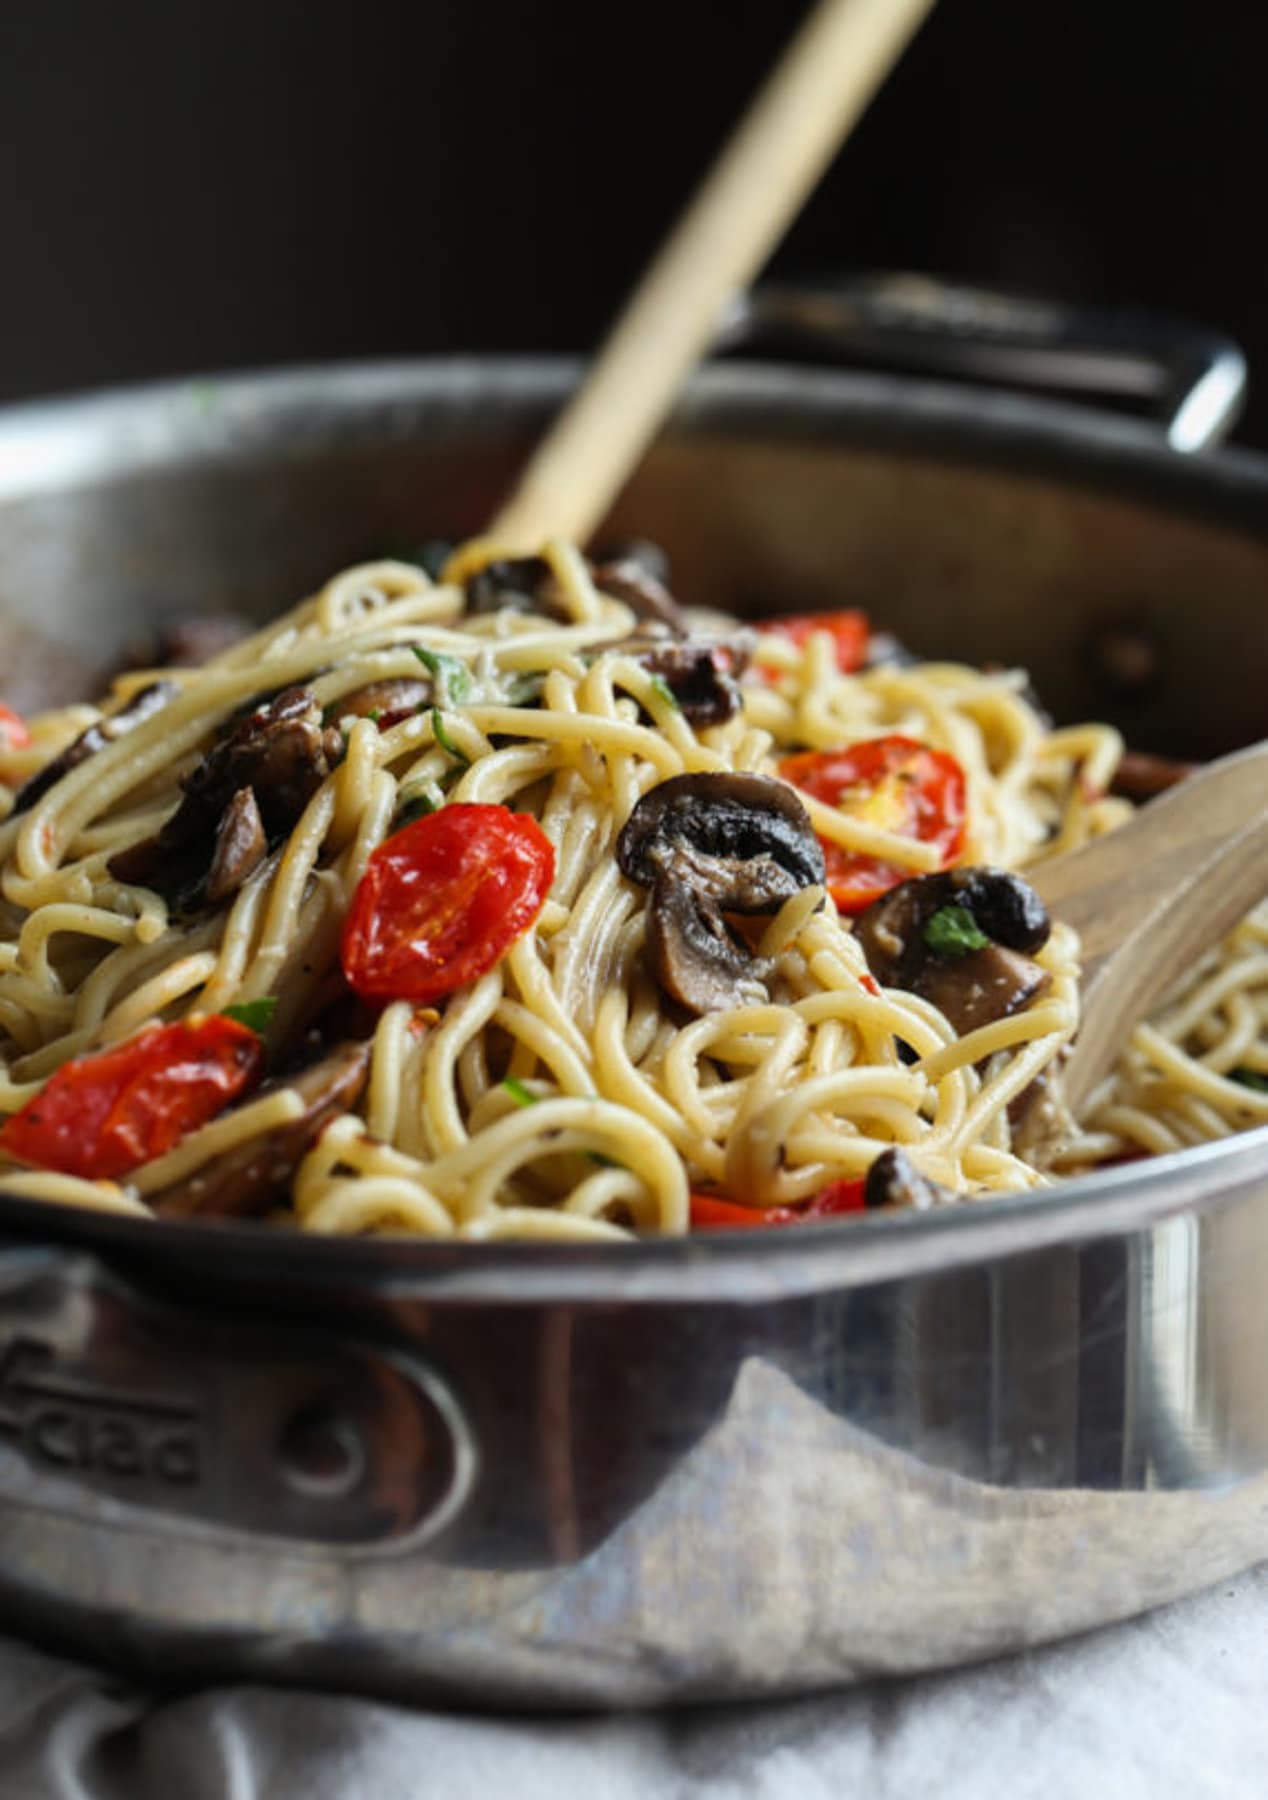 Pasta with garlic butter and roasted tomatoes and mushrooms in a stainless steel skillet